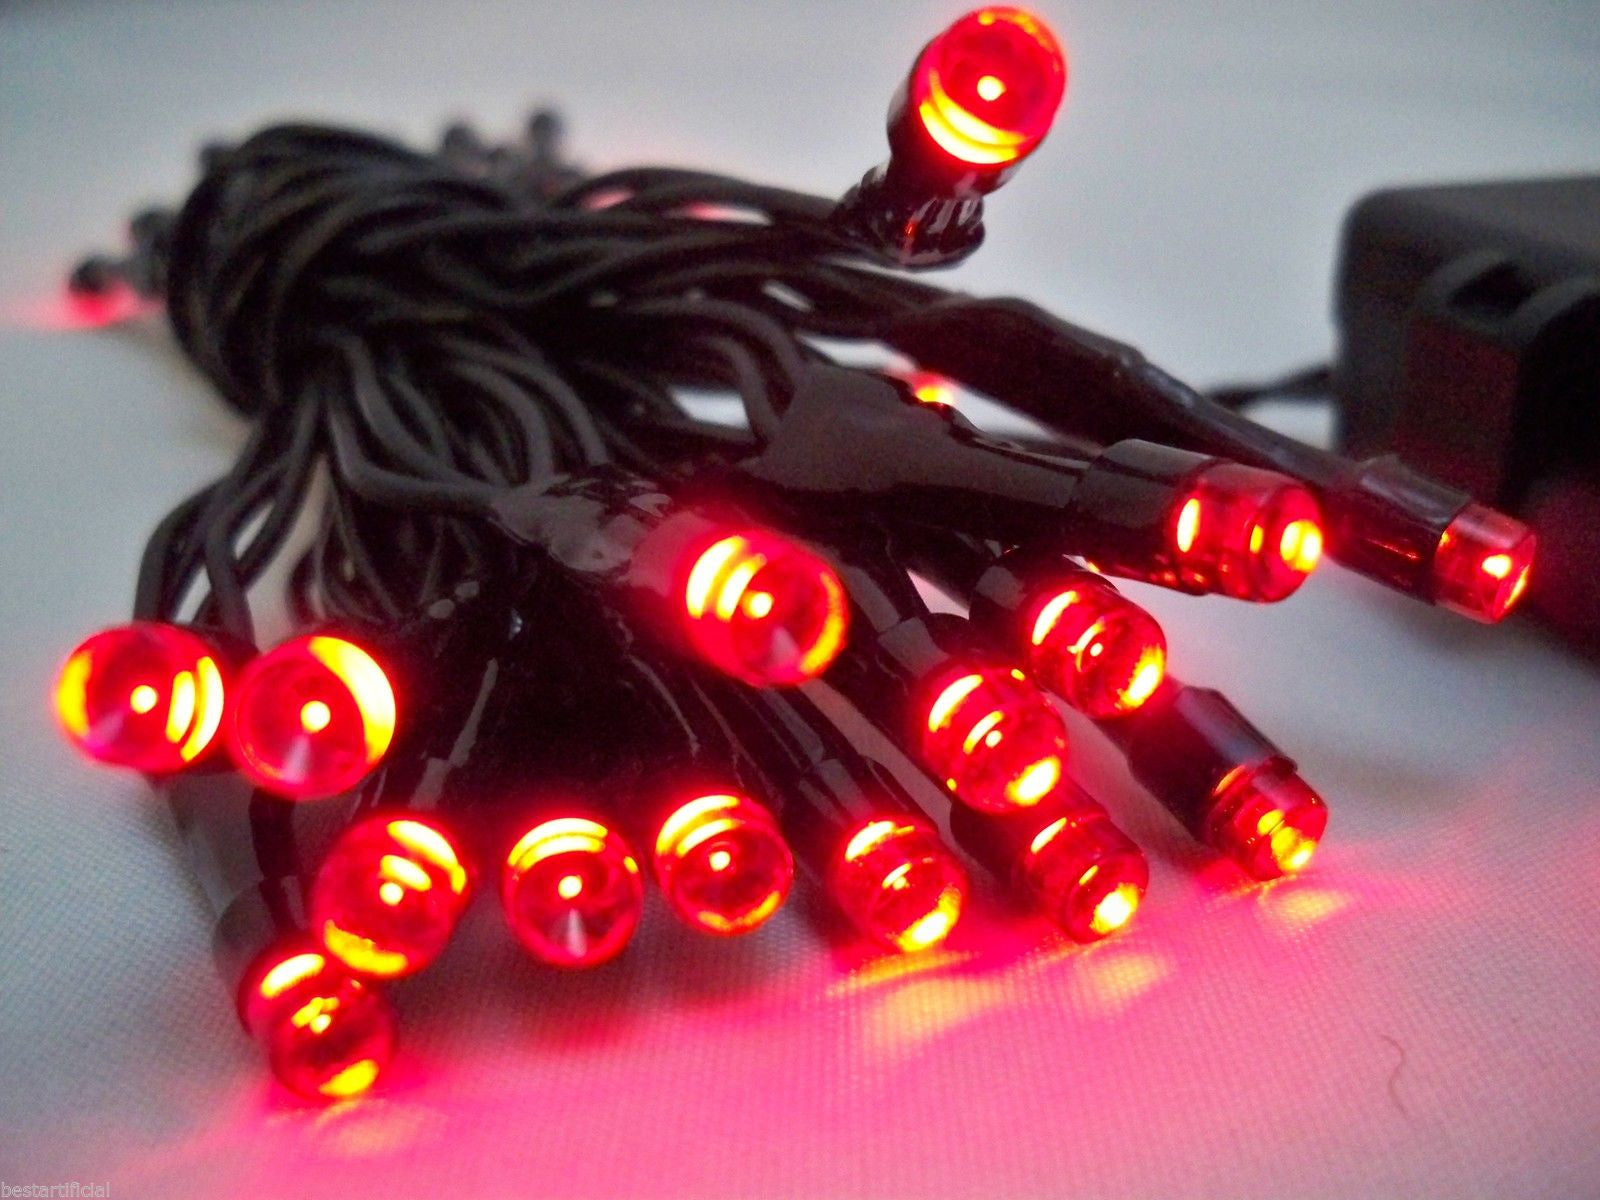 40 LED Indoor Battery String Lights 4M Length Party Fairy Christmas